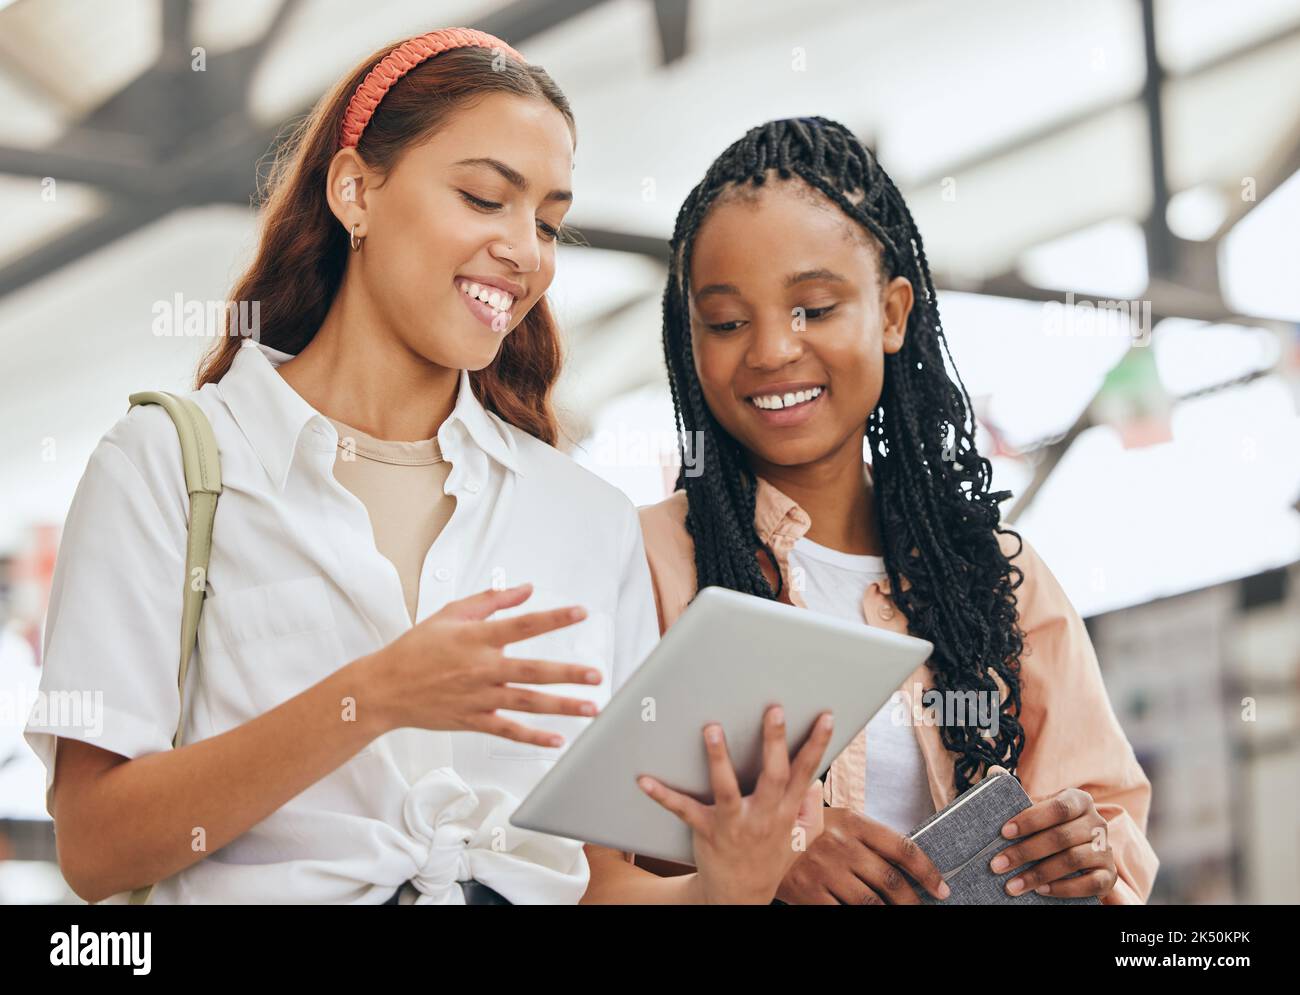 University students, women friends and tablet research learning, studying and education at college. Happy diversity youth reading digital academics Stock Photo